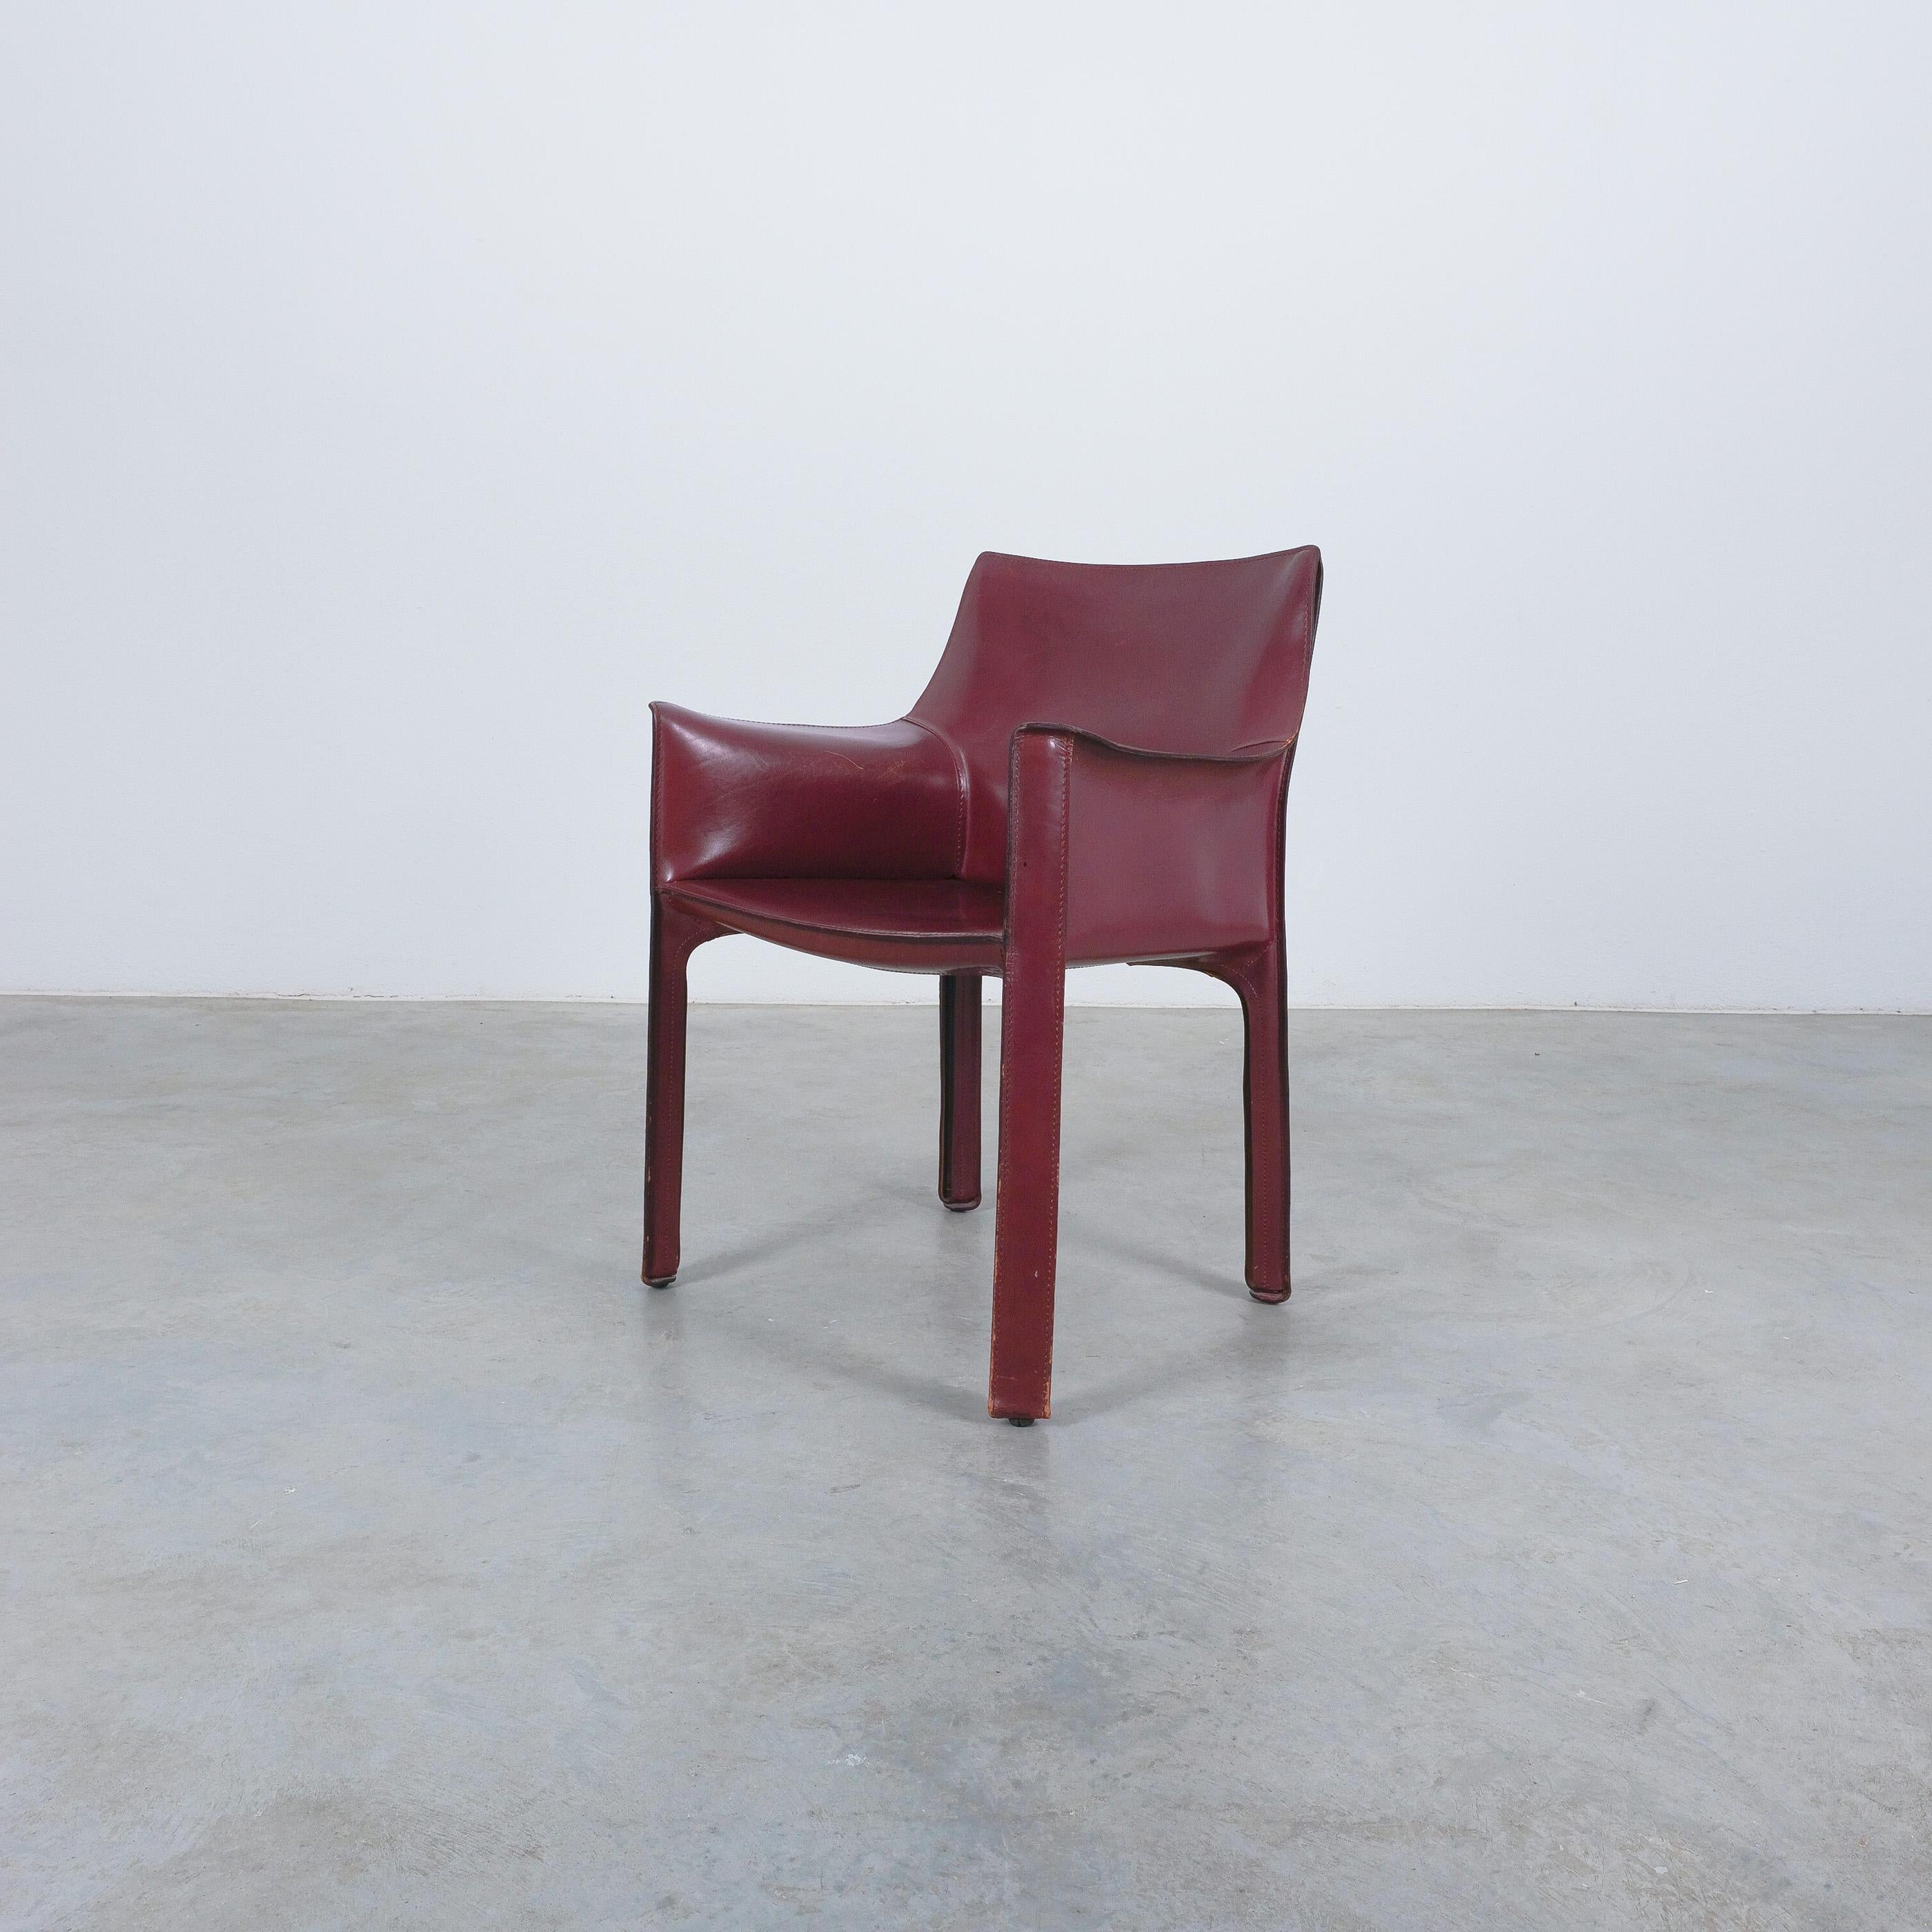 Post-Modern Mario Bellini Cassina Cab 413 Burgundy Red Leather Dining Chairs, 1980 For Sale